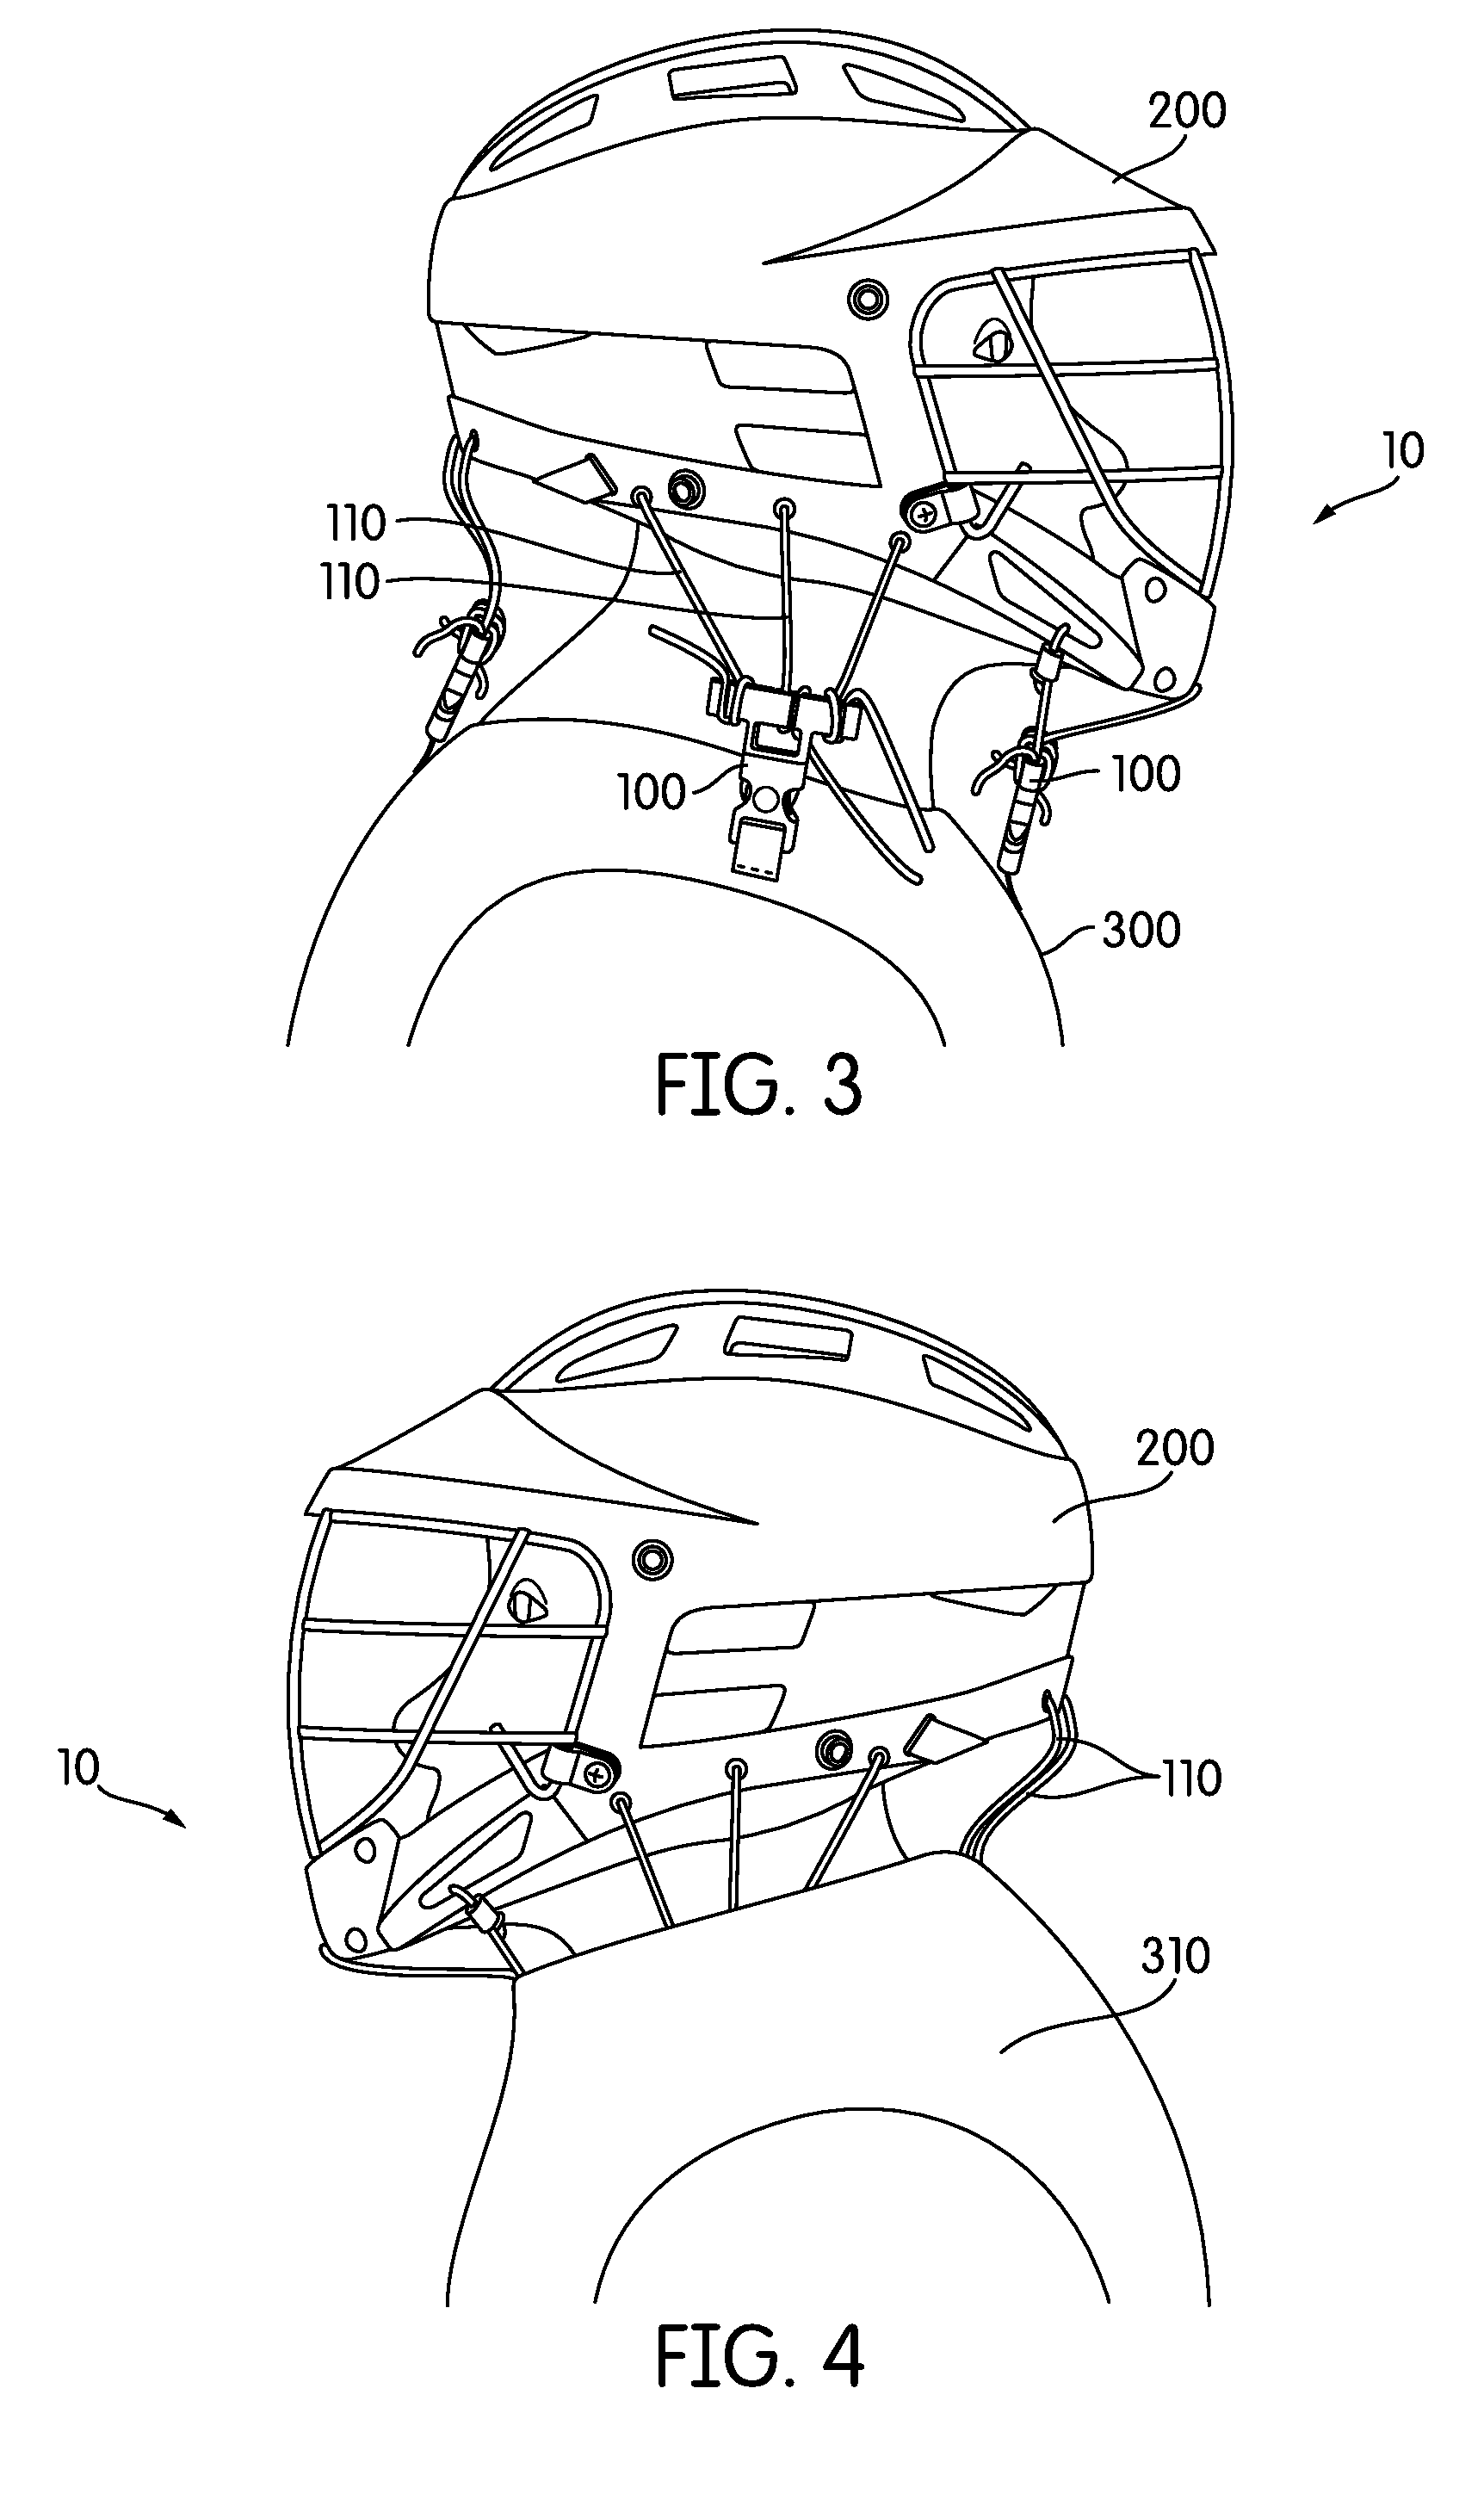 Apparatus for preventing neck injury, spinal cord injury and concussion